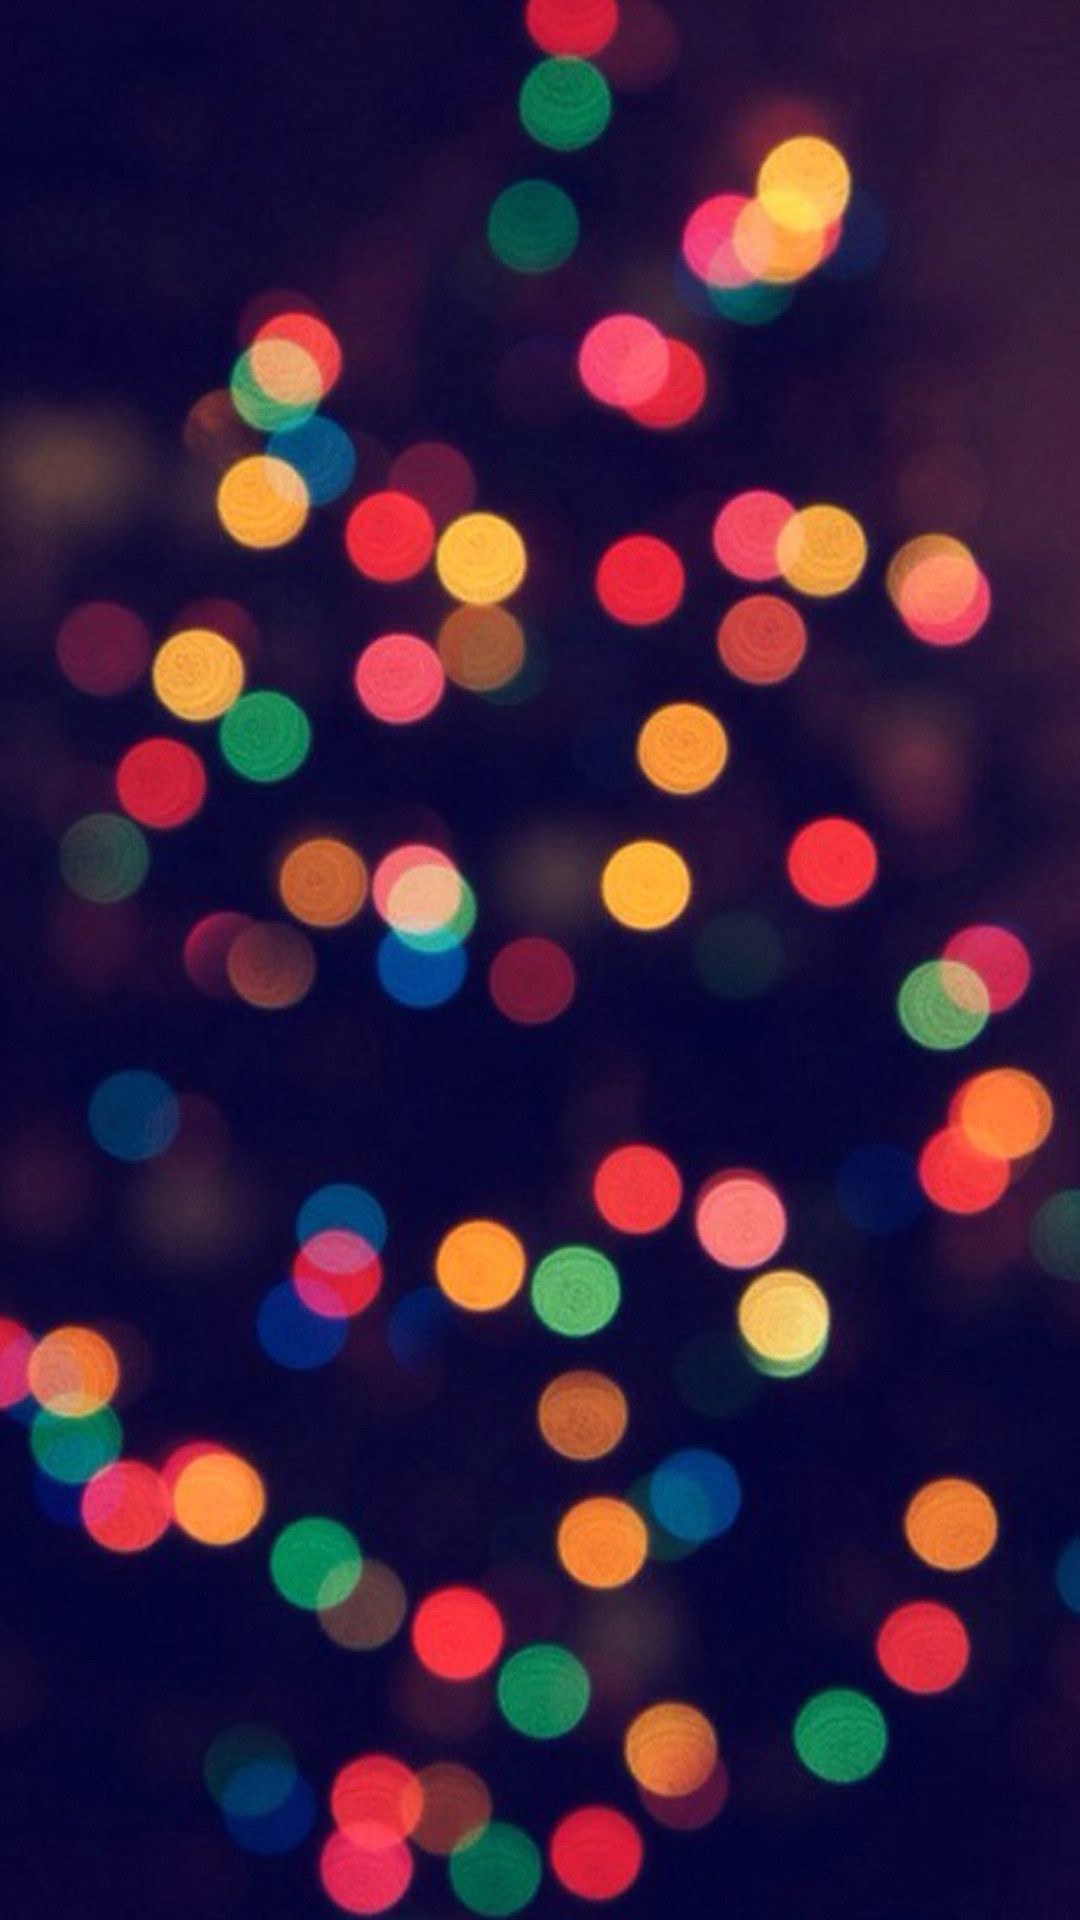 1080x1920 20 Christmas Wallpapers for iPhone and iPhone 6 - iPhoneHeat